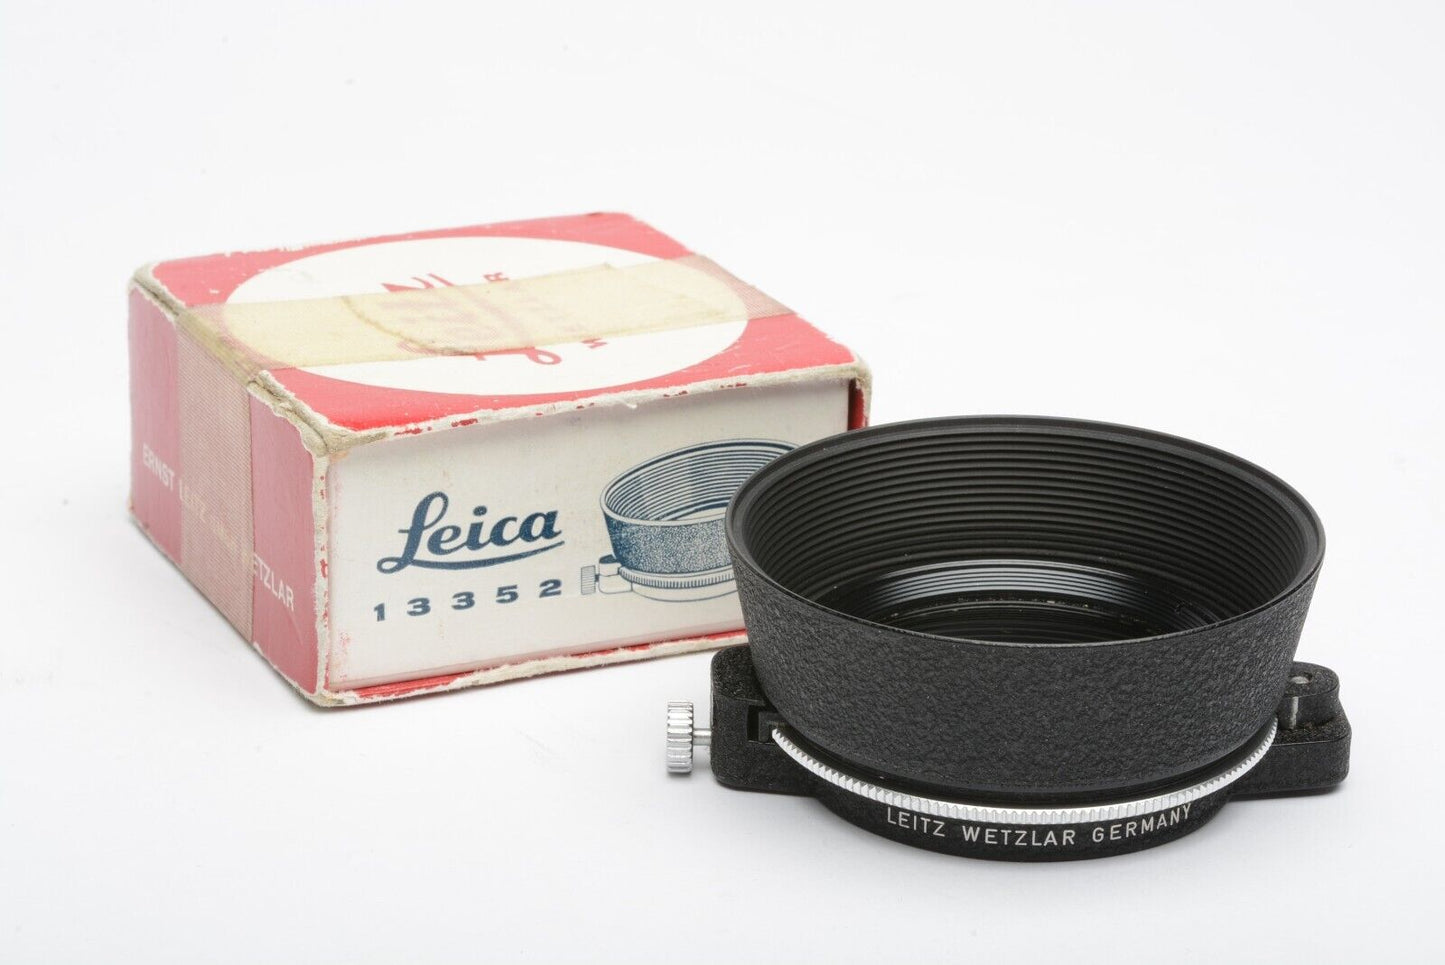 MINT- LEICA #13352 SWING OUT POLARIZING FILTER WITH LENS SHADE E39